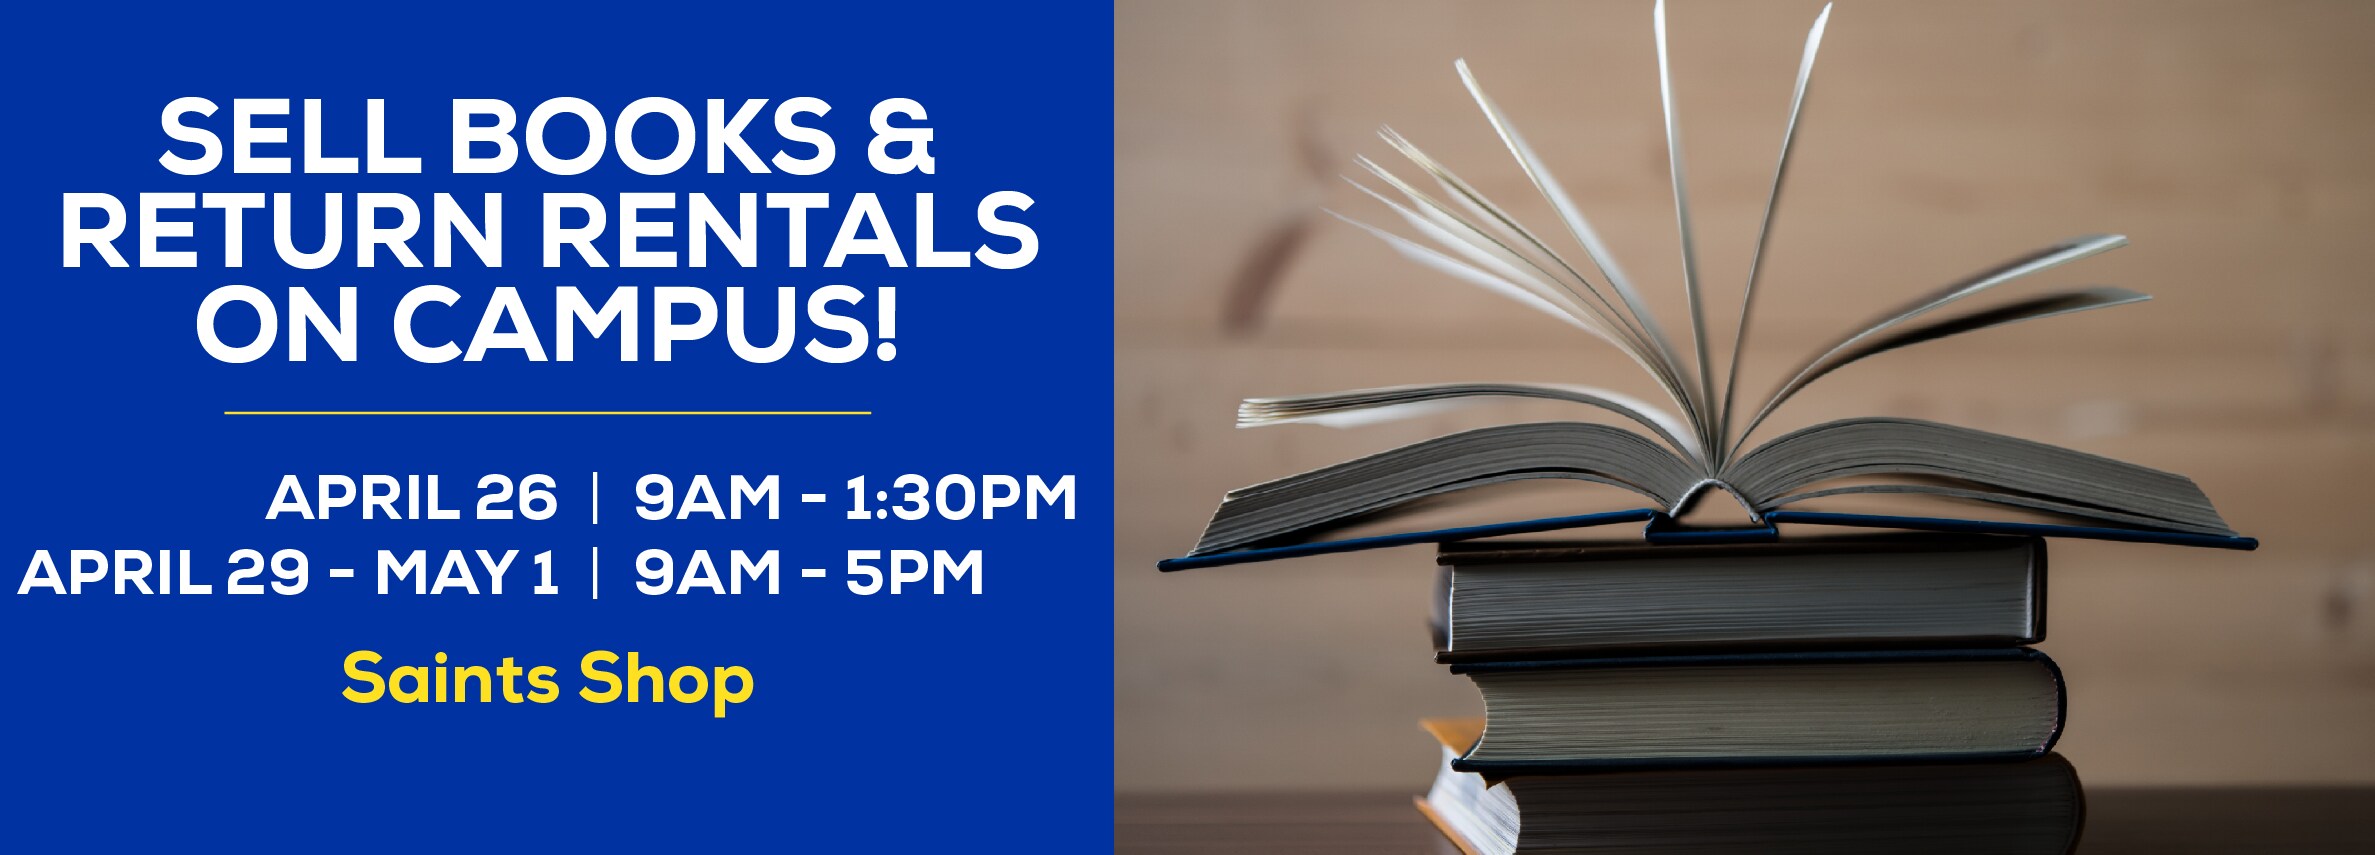 Sell books and return your rentals on campus! April 26, 9am to 1:30pm. April 29 - May 1, 9 am to 5pm at the Saints Shop.